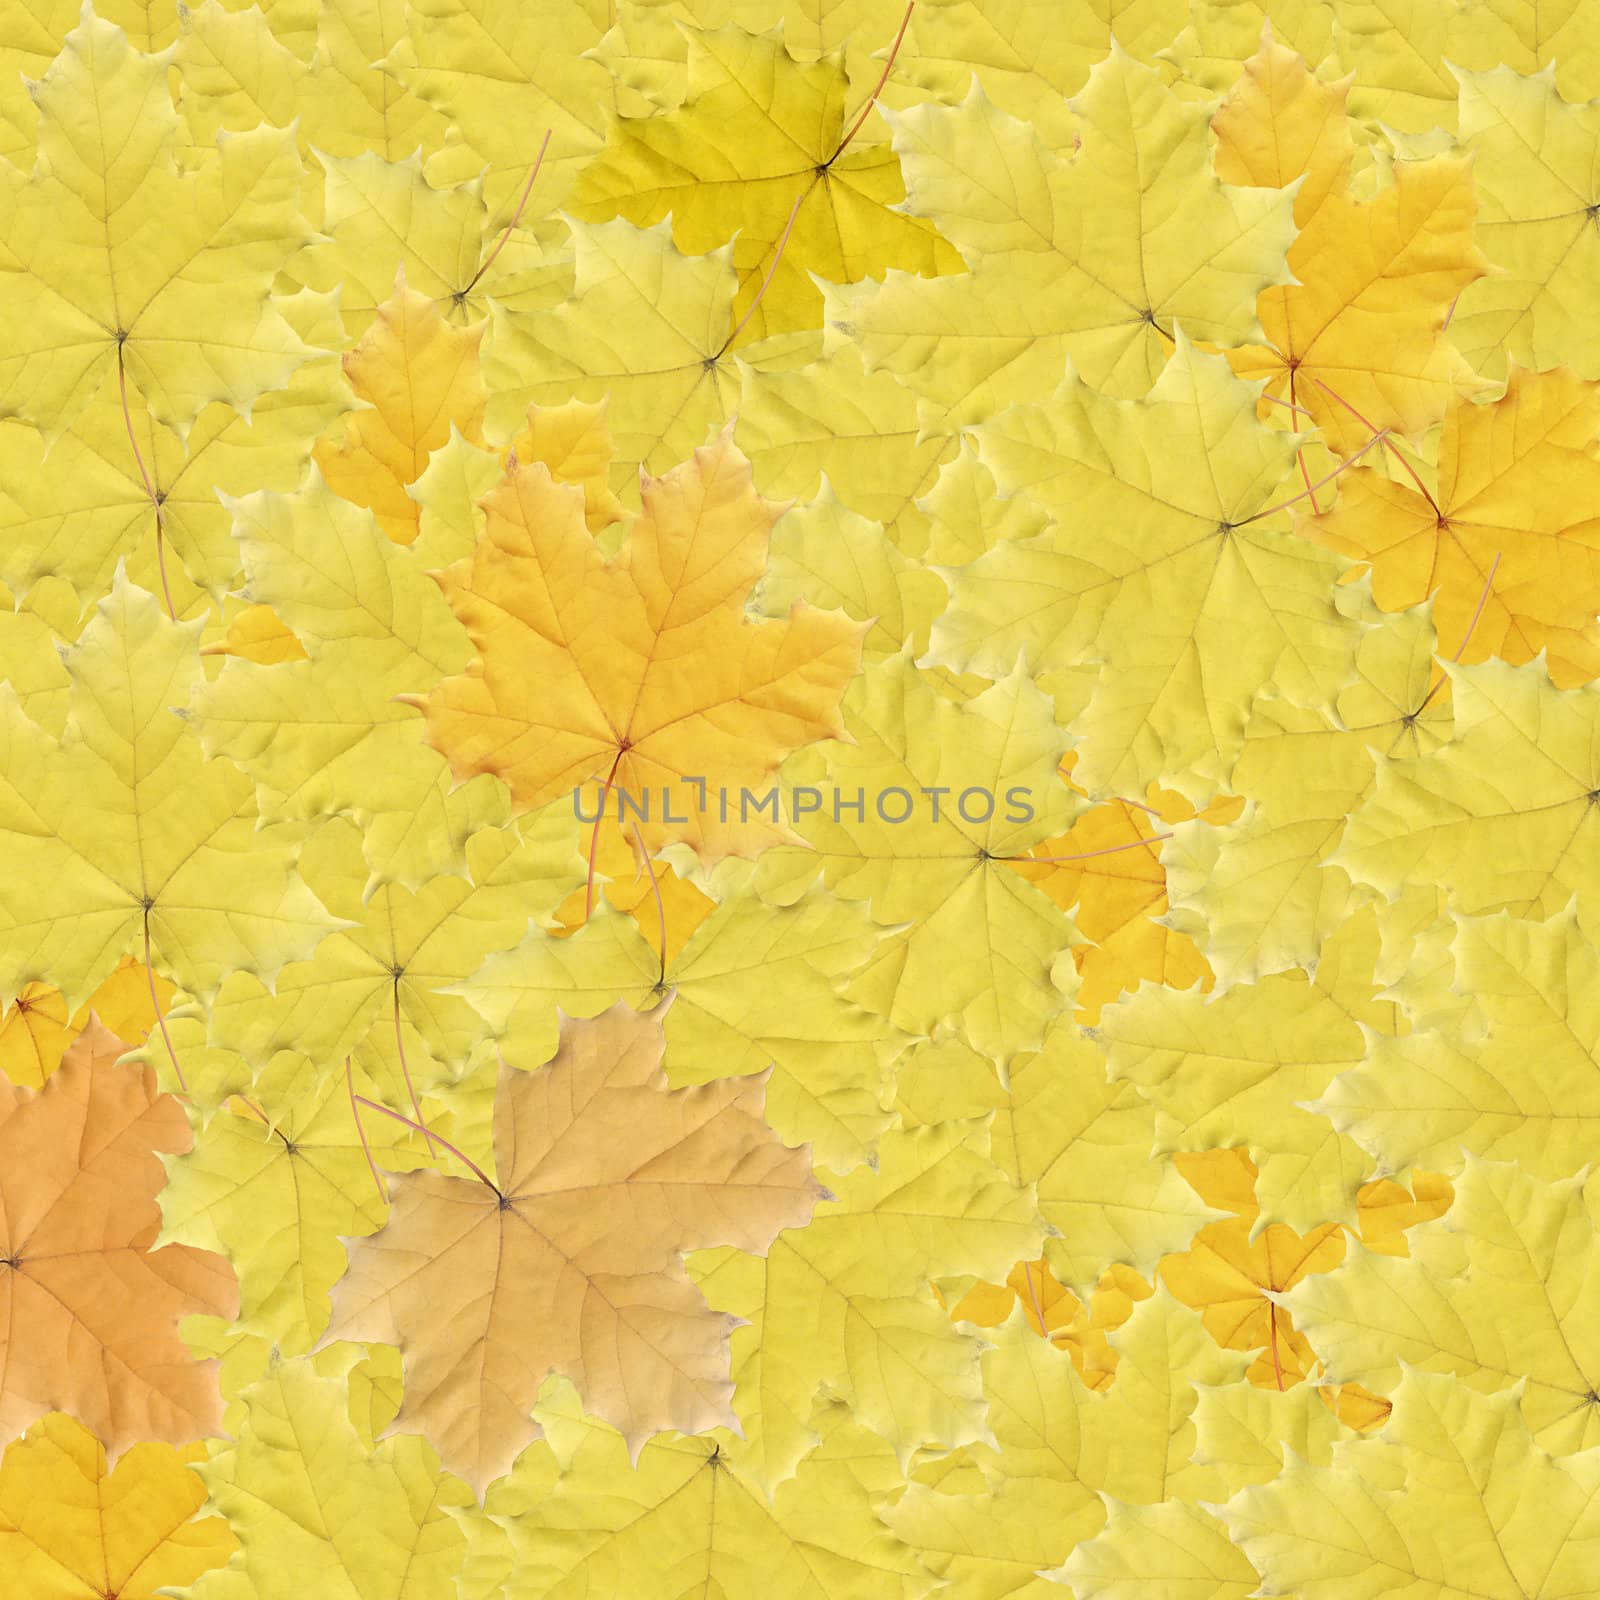 Background from autumn orange and yellow leaves of maple